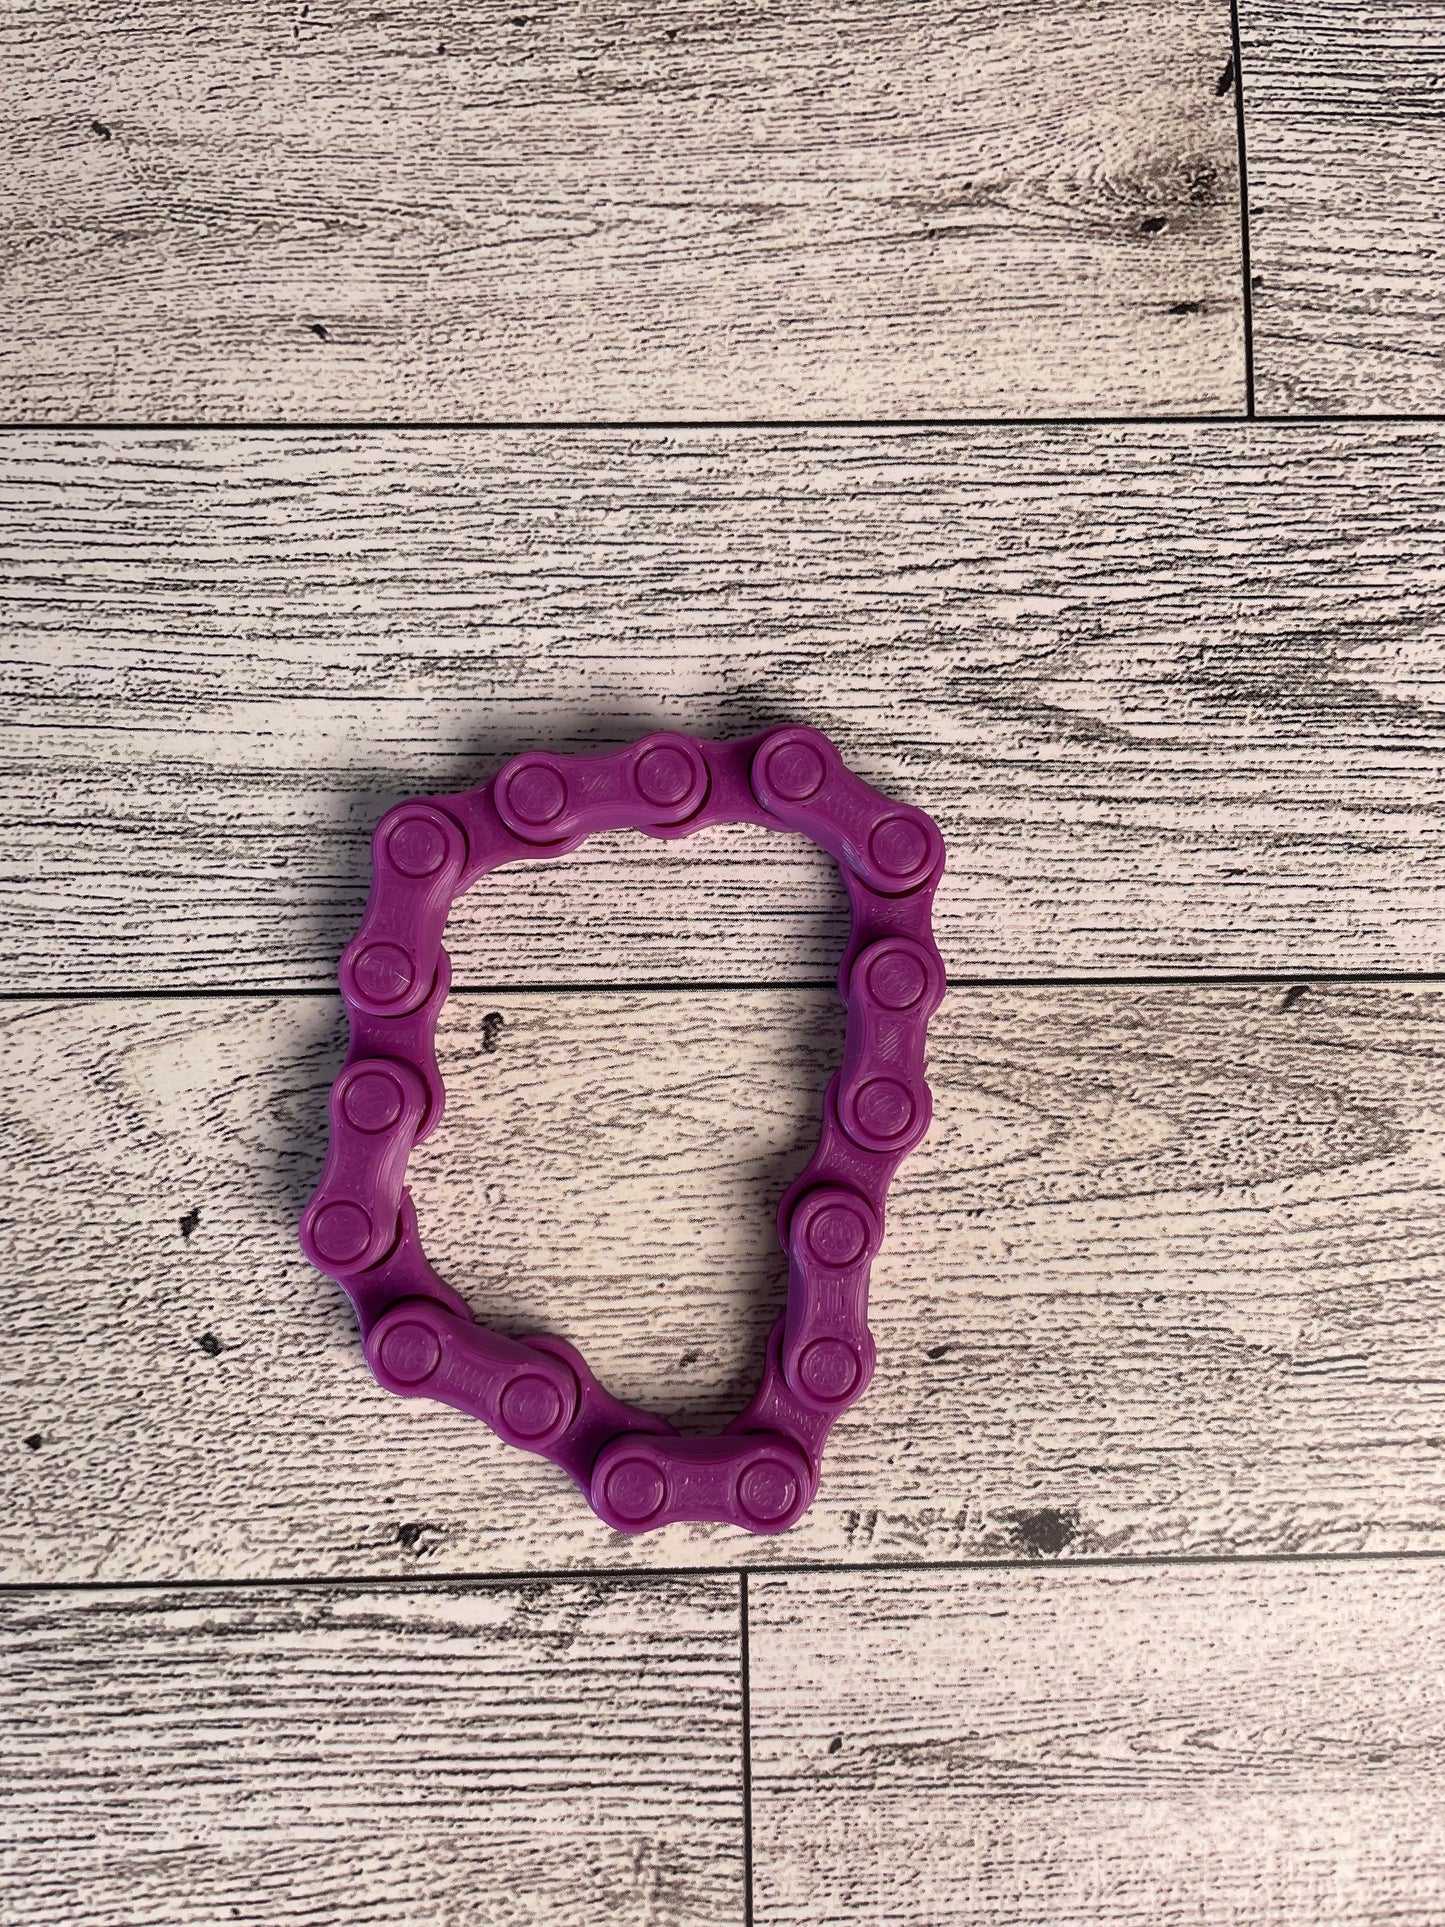 A purple chain link on a wood backdrop. The chain is arranged in a circle shape and there are eight links.